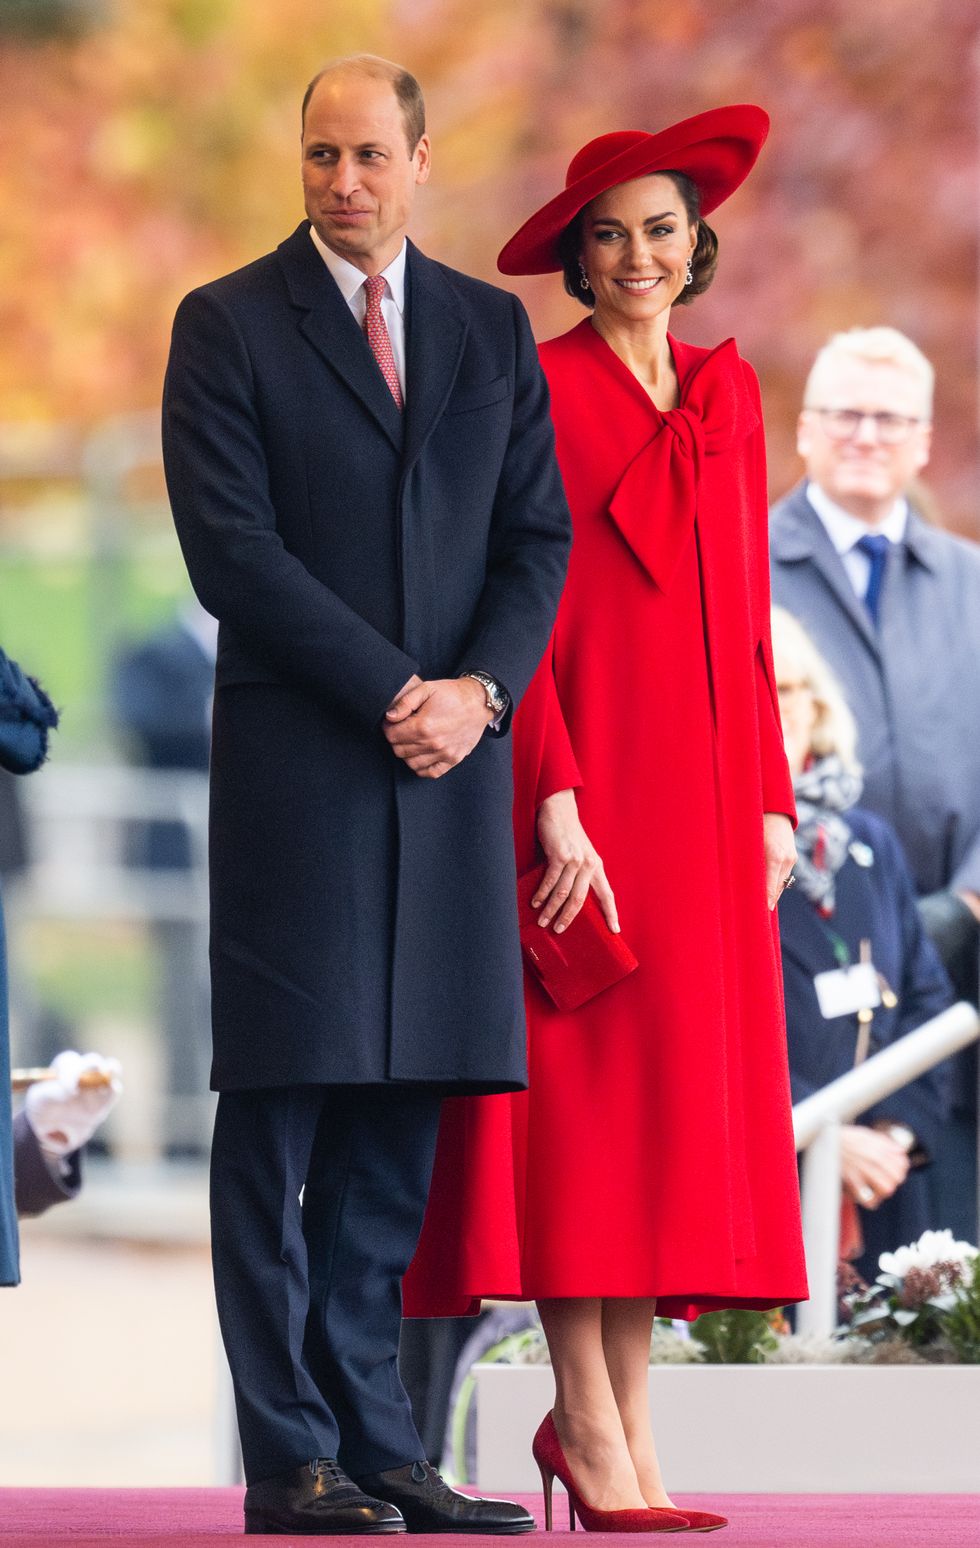 Kate Middleton's Best Fashion Looks - Duchess of Cambridge's Chic